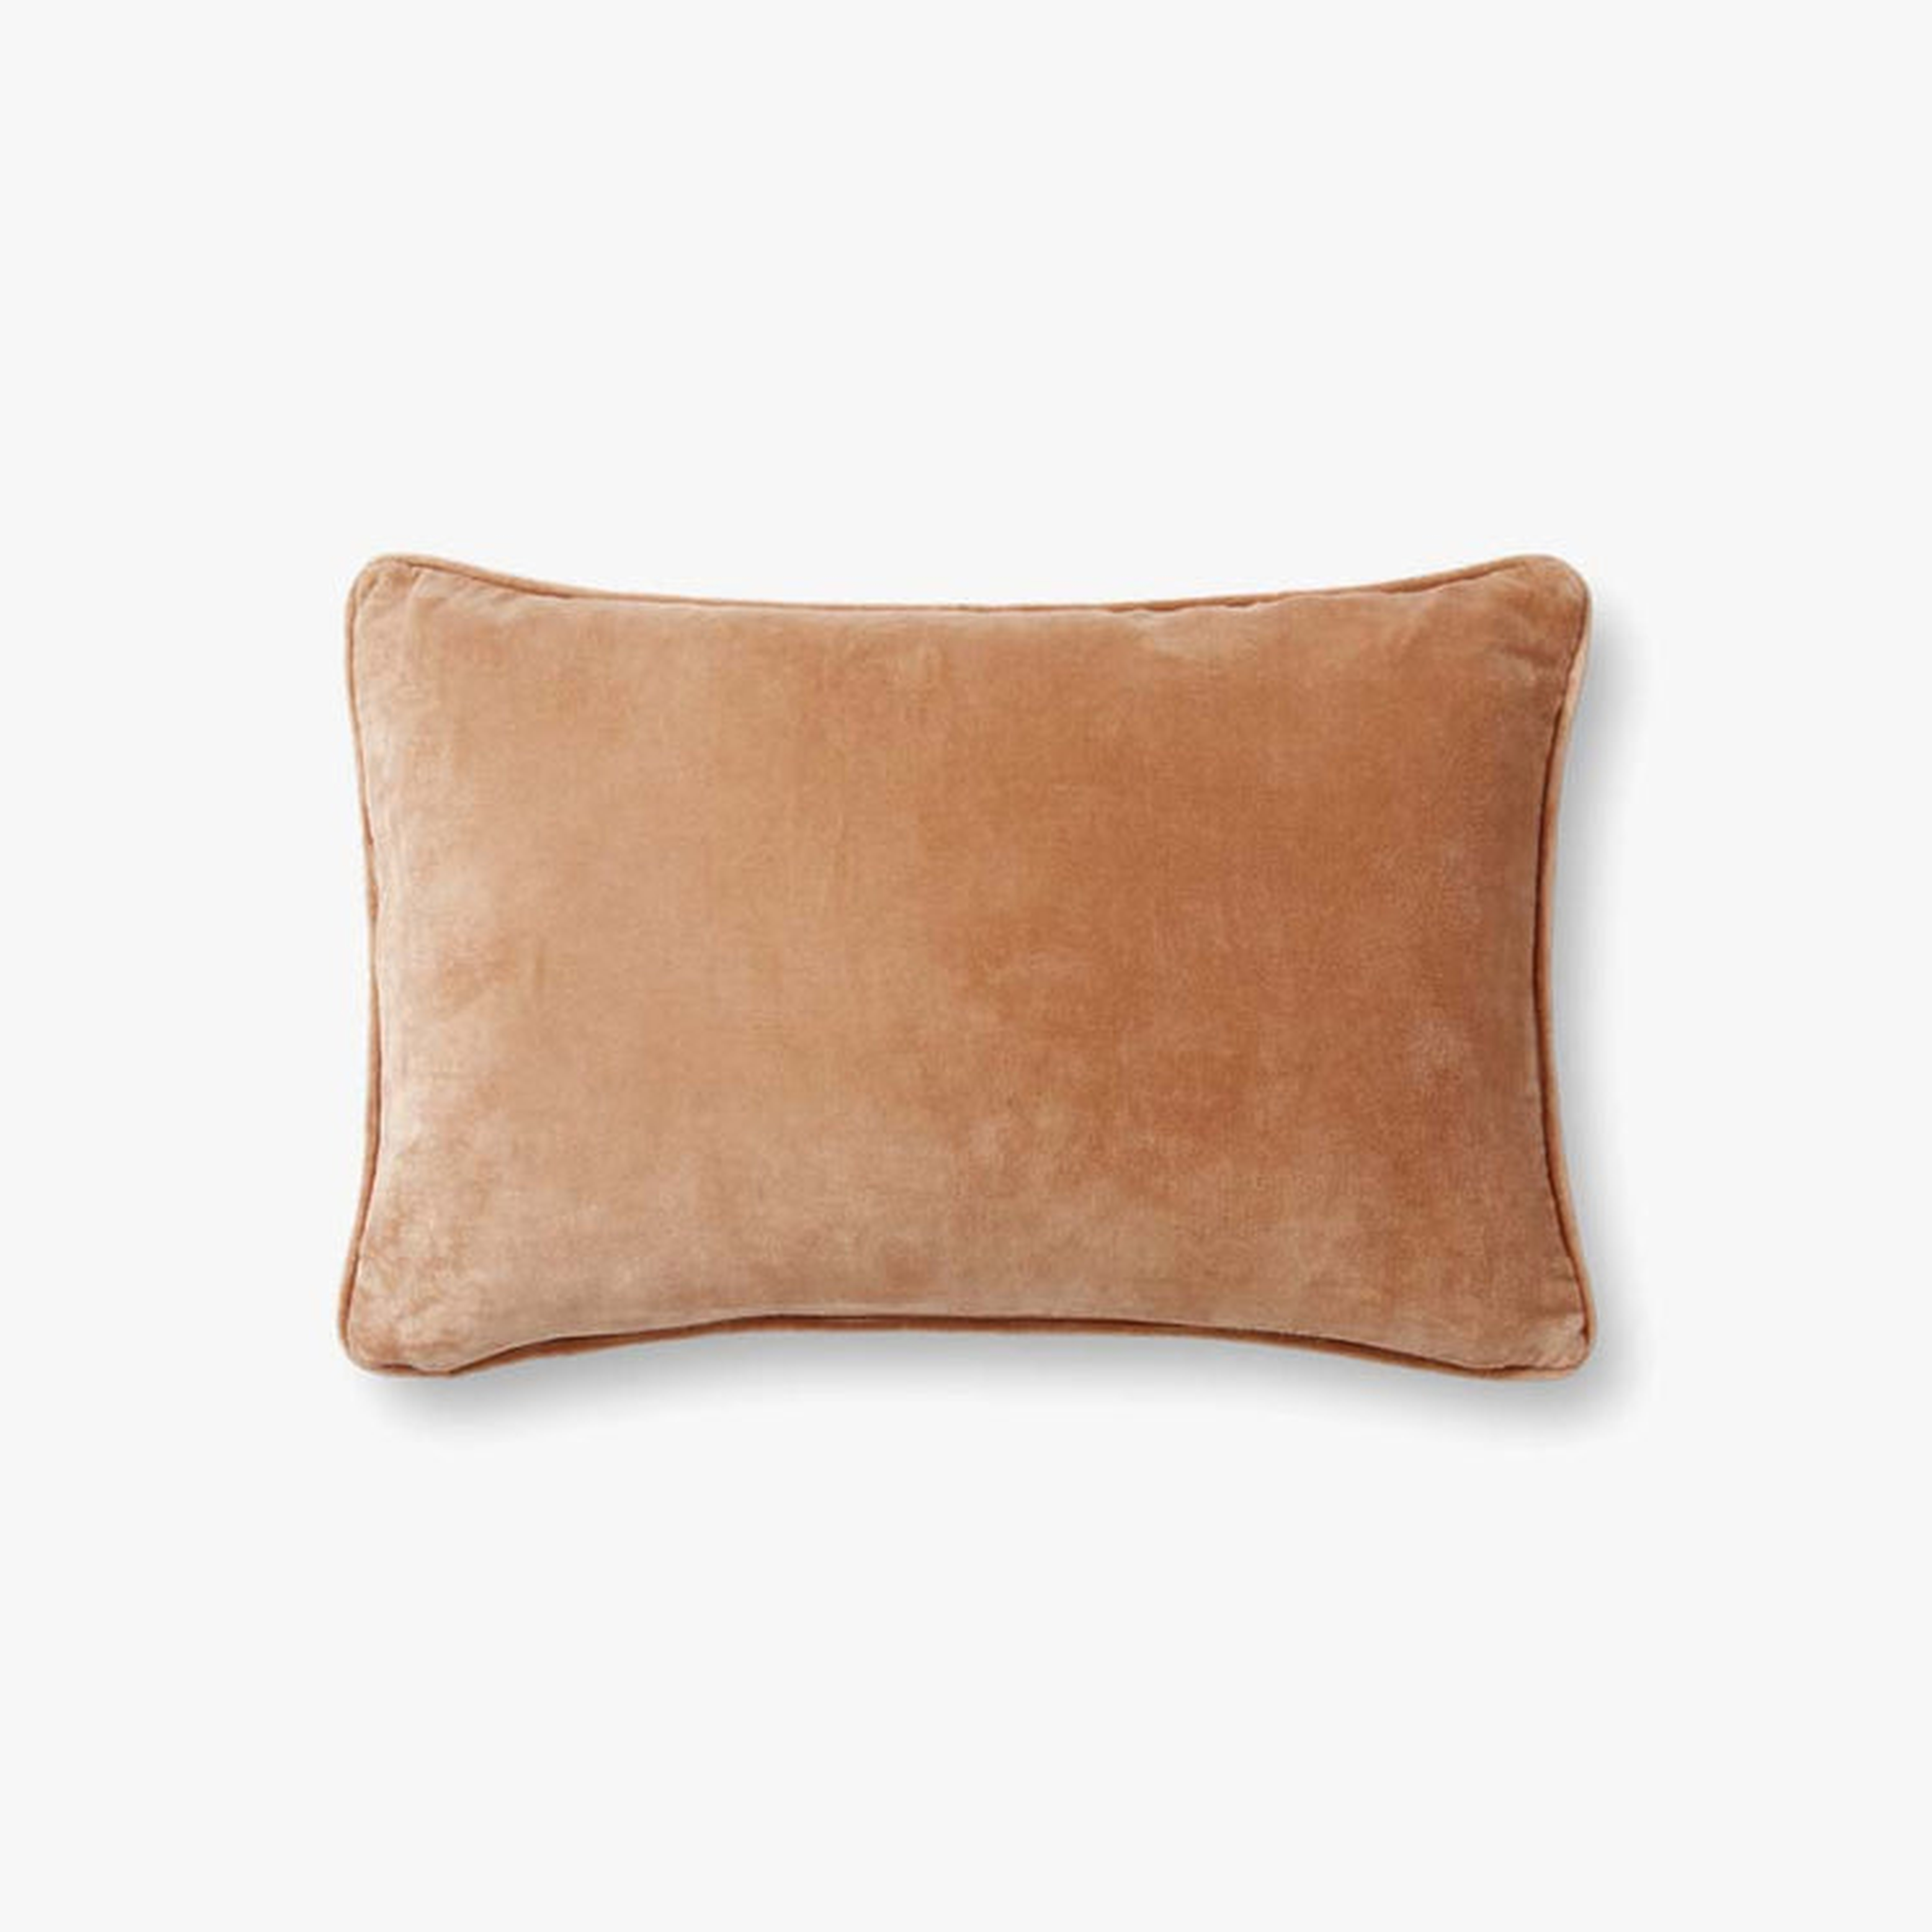 PILLOWS PMH1153 PEACH 13" x 21" Cover Only - Magnolia Home by Joana Gaines Crafted by Loloi Rugs